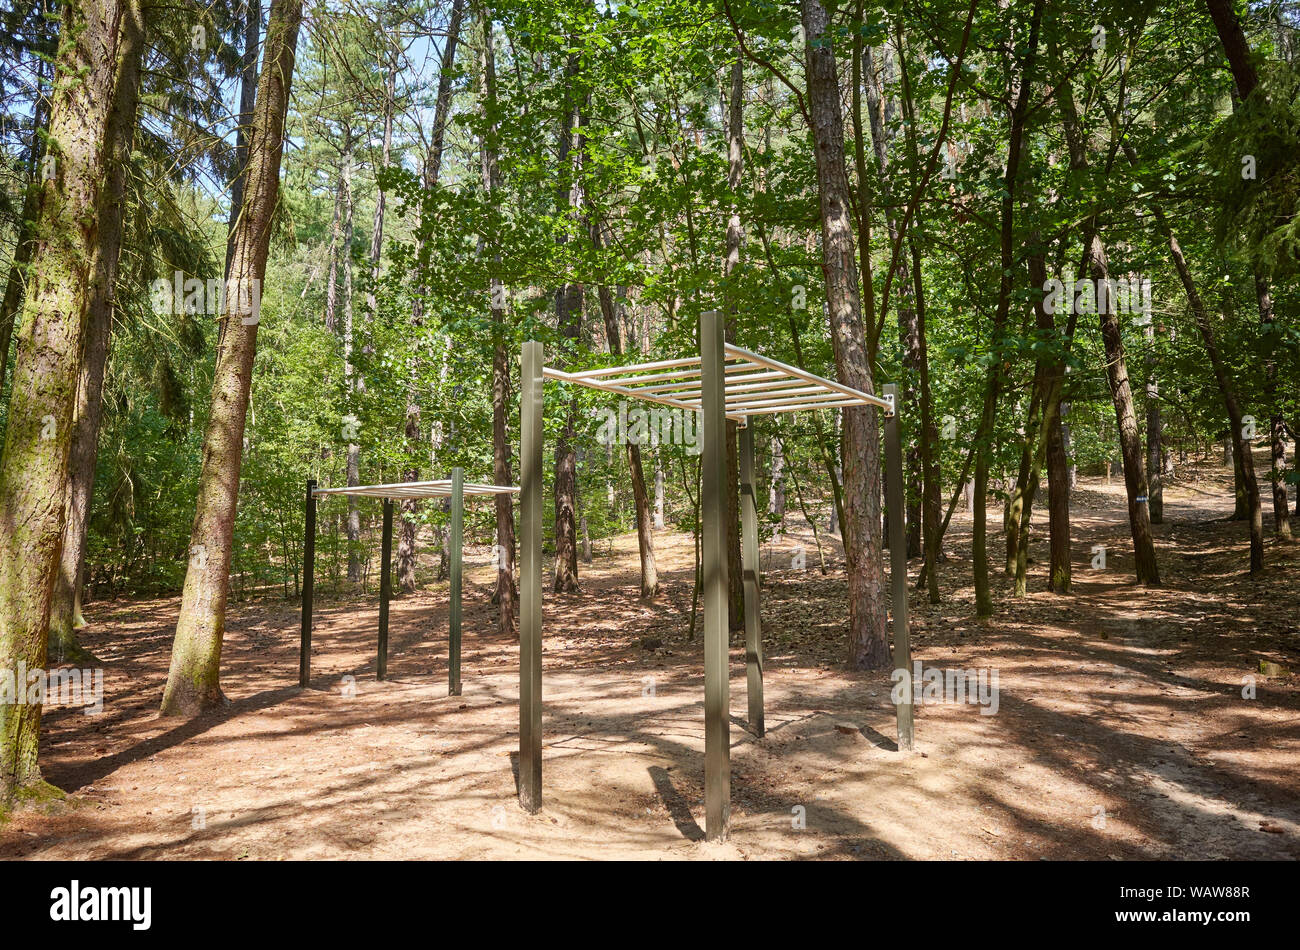 Pull up bars in a forest, outdoor gym equipment. Stock Photo